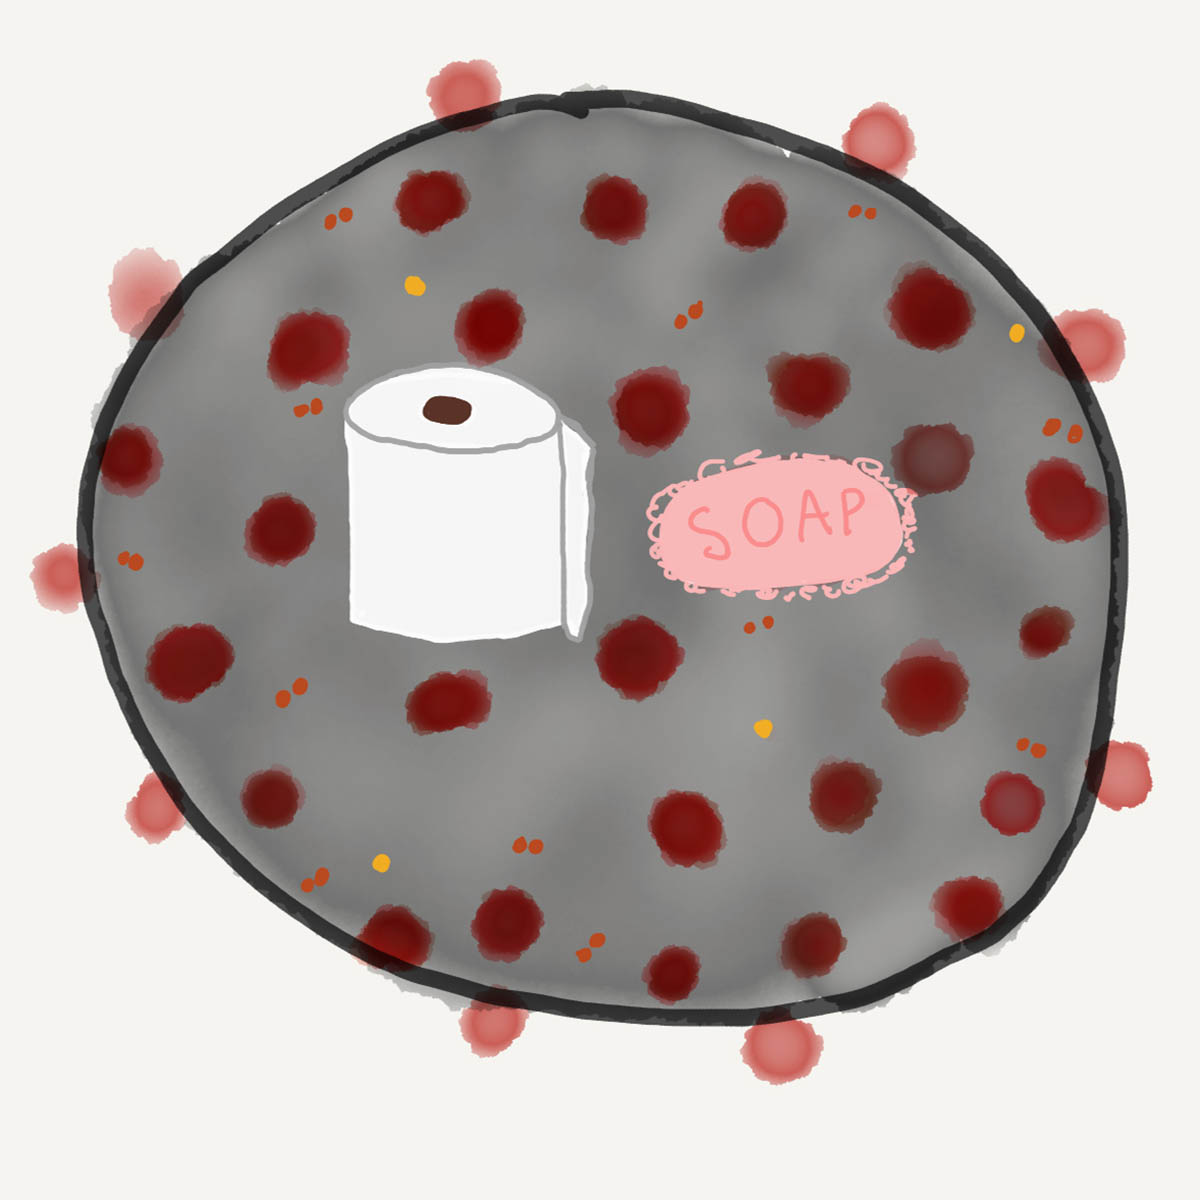 drawing of covid-19 virus cell and a roll of toilet paper and bar of soap superimposed on it.